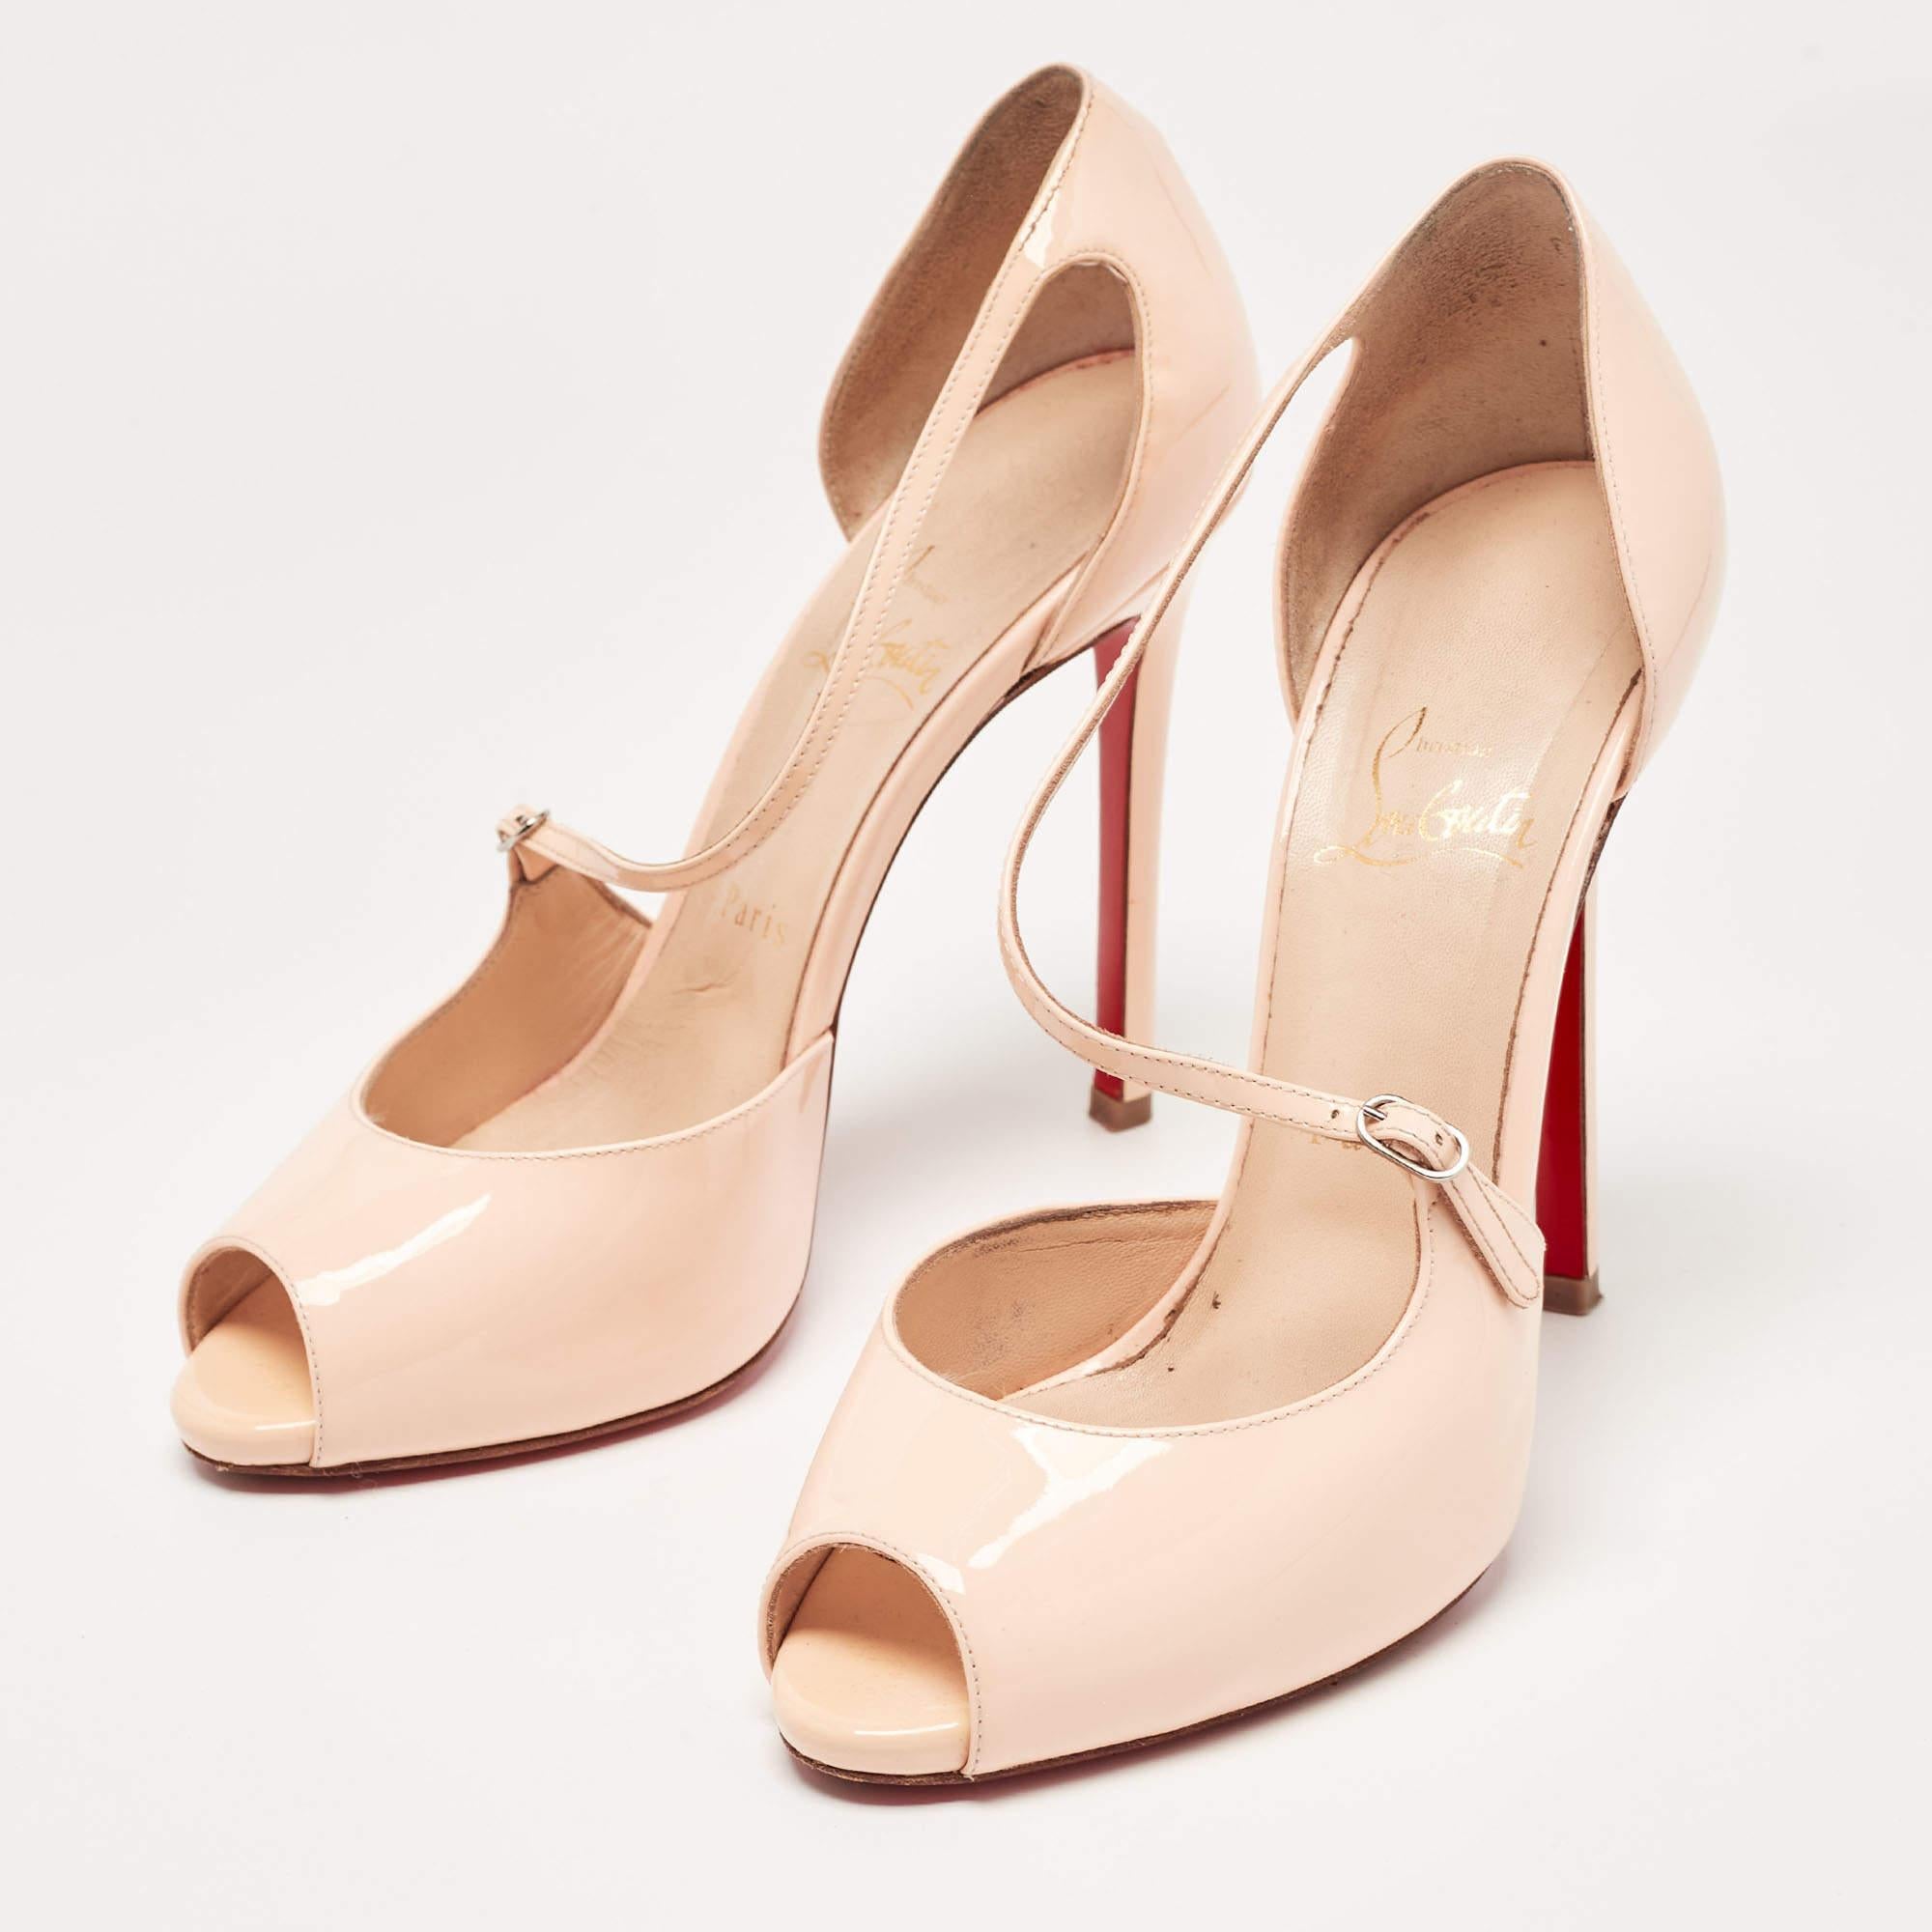 Christian Louboutin Light Pink Patent Leather Peep Toe D'orsay Sandals Size 38 For Sale 4